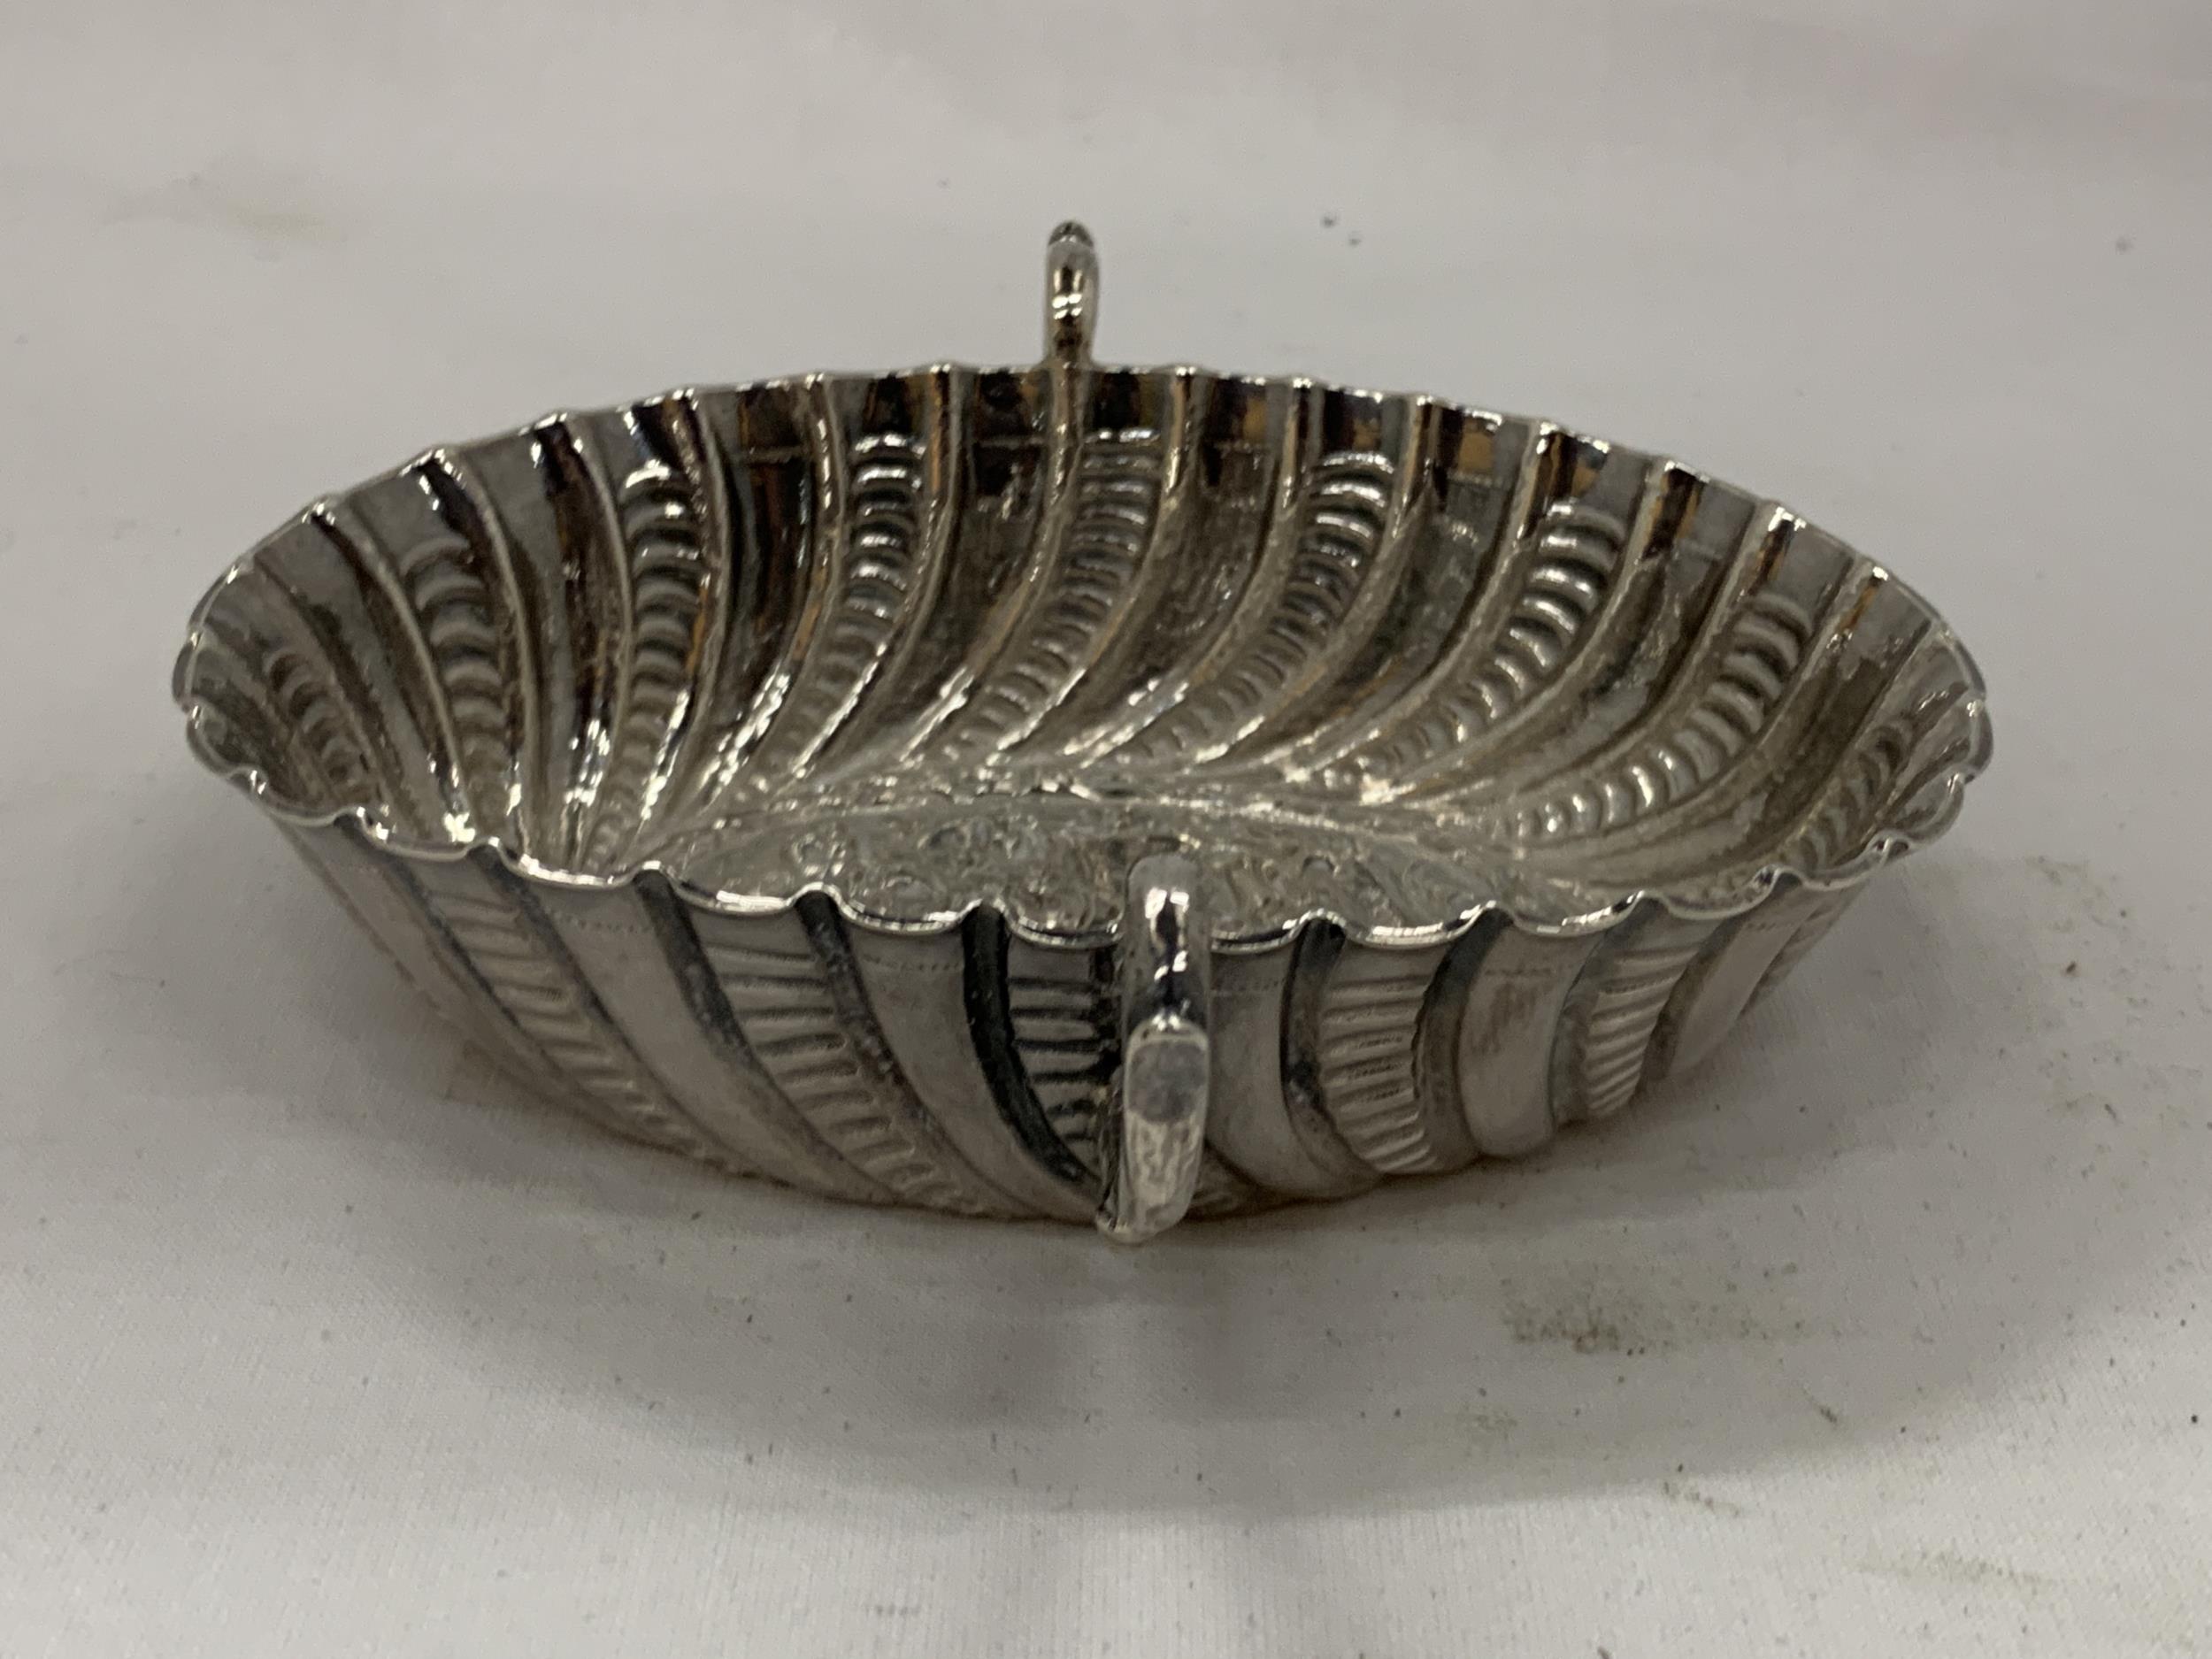 A TWIN HANDLED SILVER BOWL WITH COAT OF ARMS DESIGN - Image 2 of 4